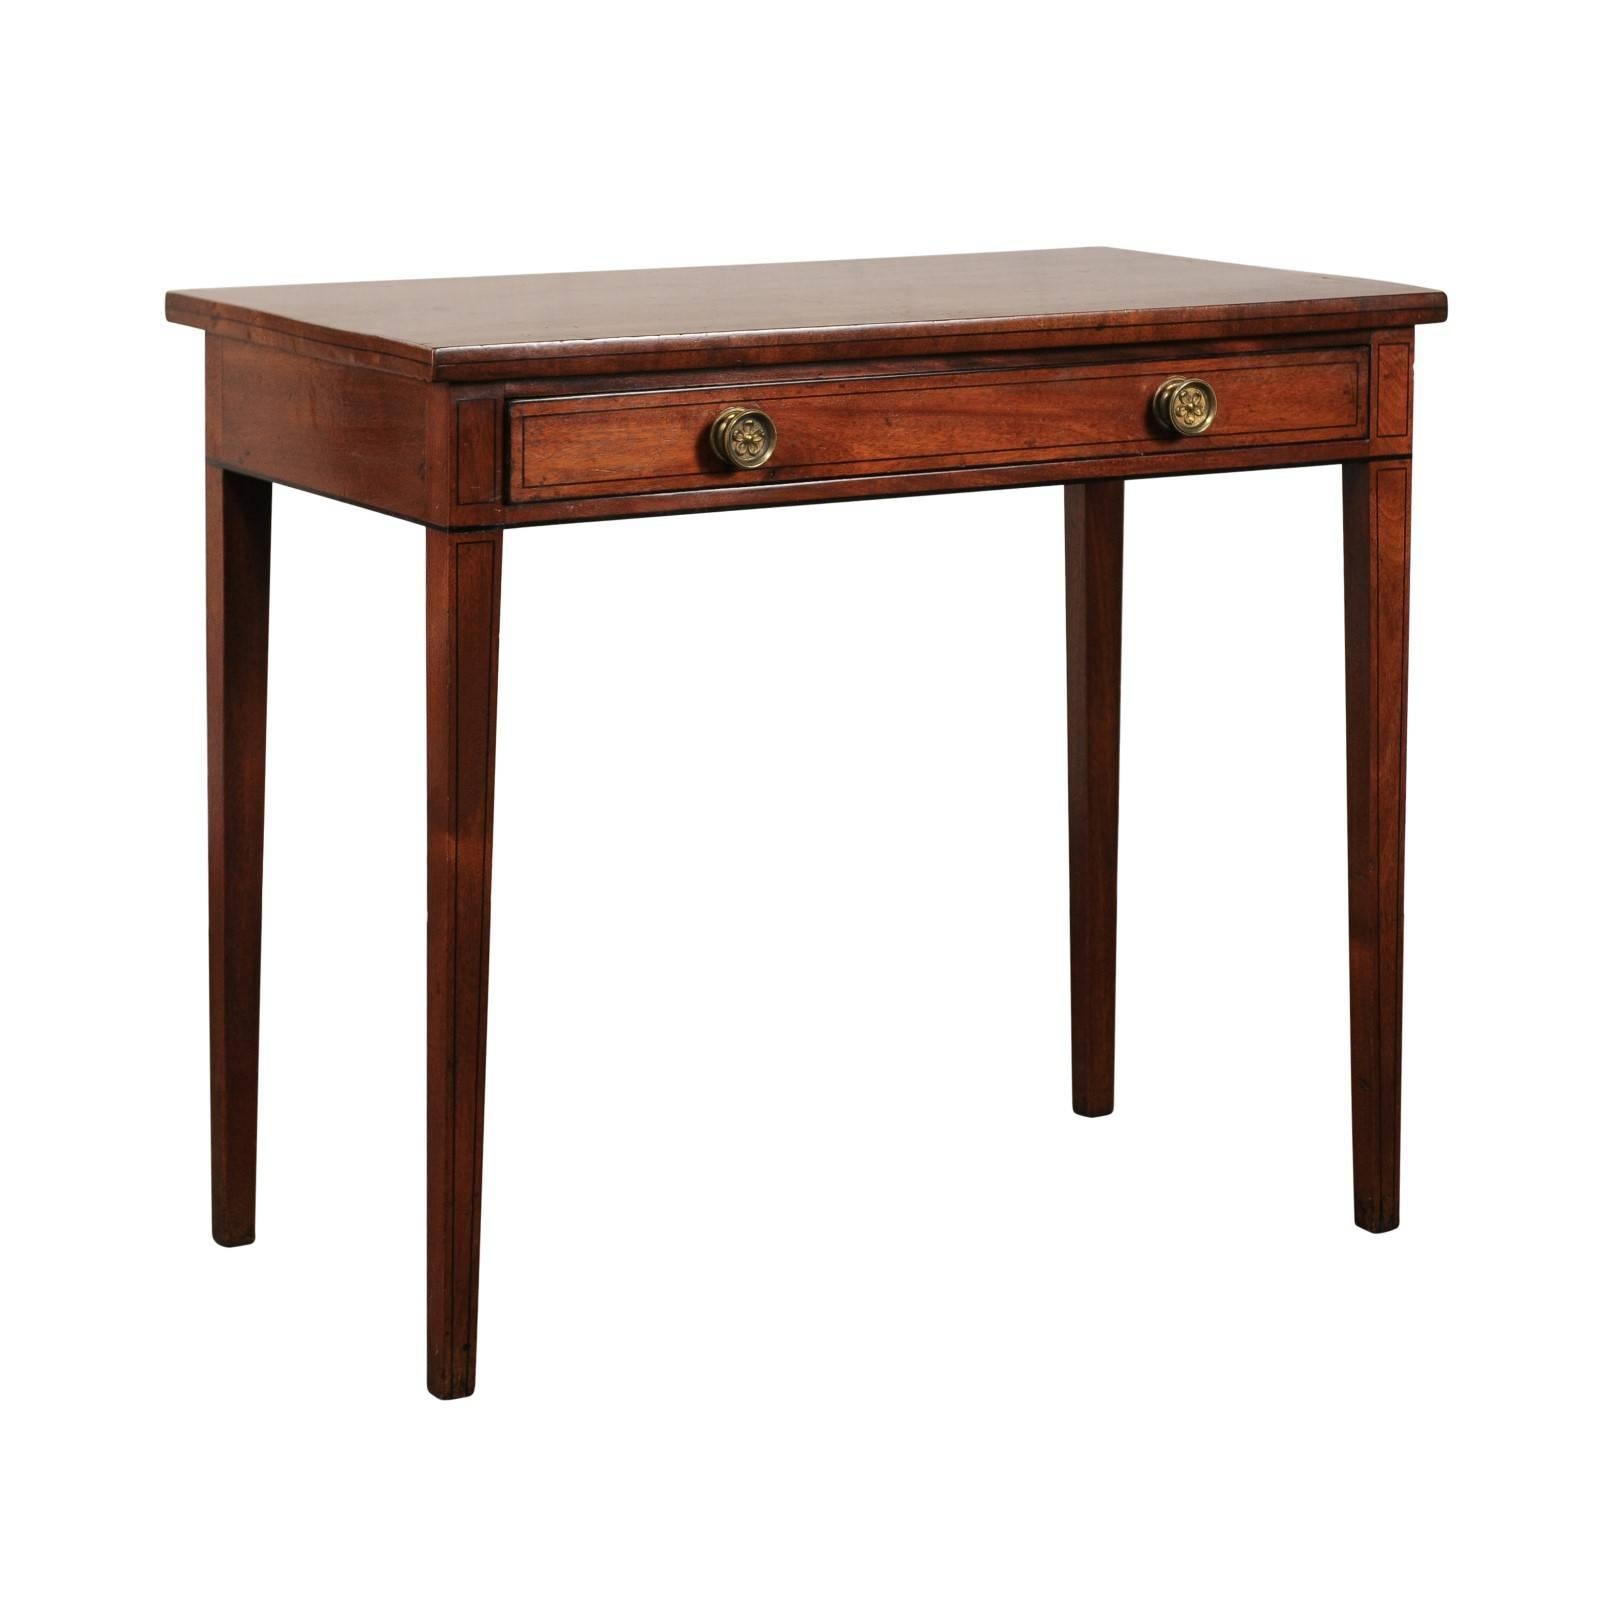 Early 19th Century English Regency Style Mahogany Table with Inlay, One Drawer